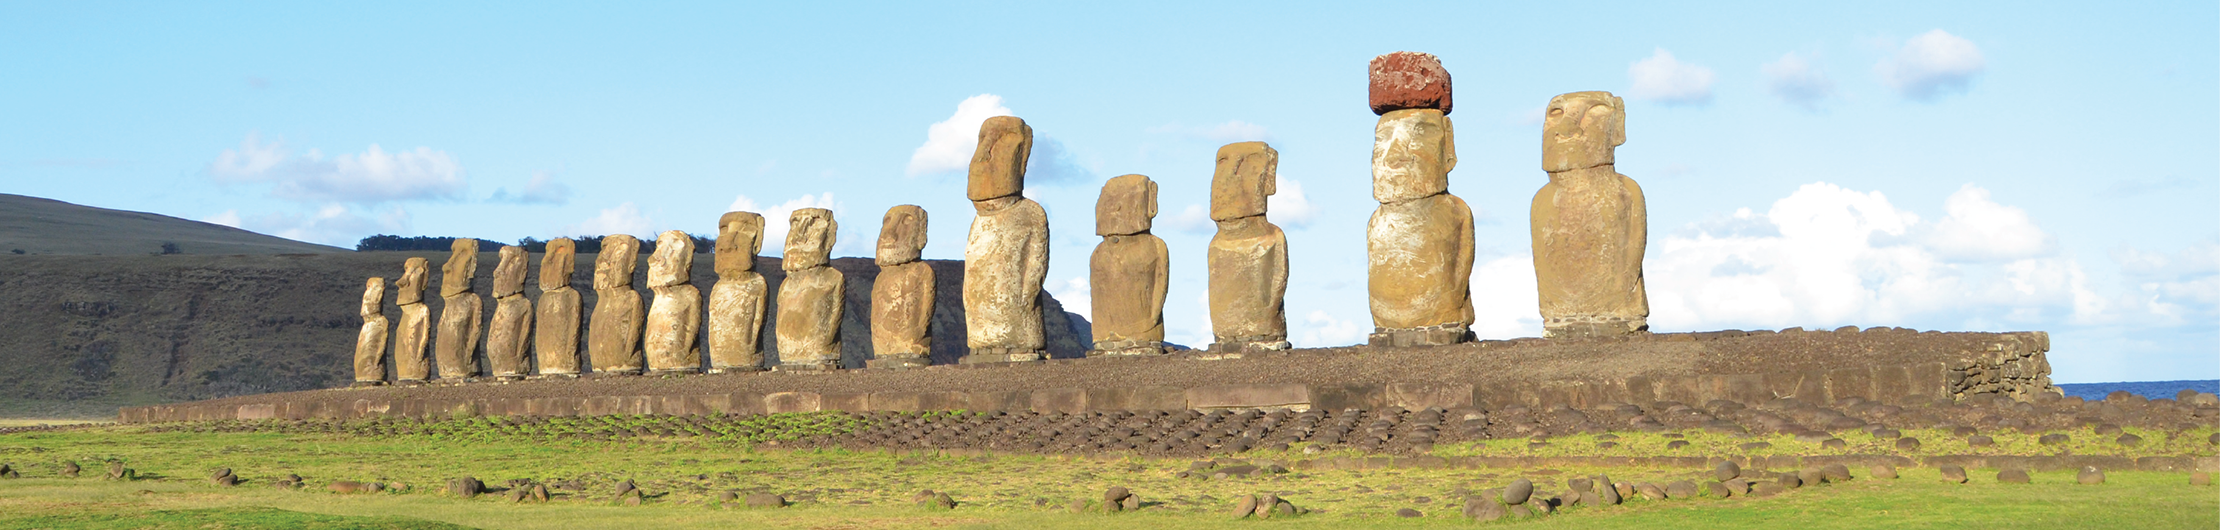 Rapa Nui (Easter Island) monument (ahu) locations explained by freshwater sources